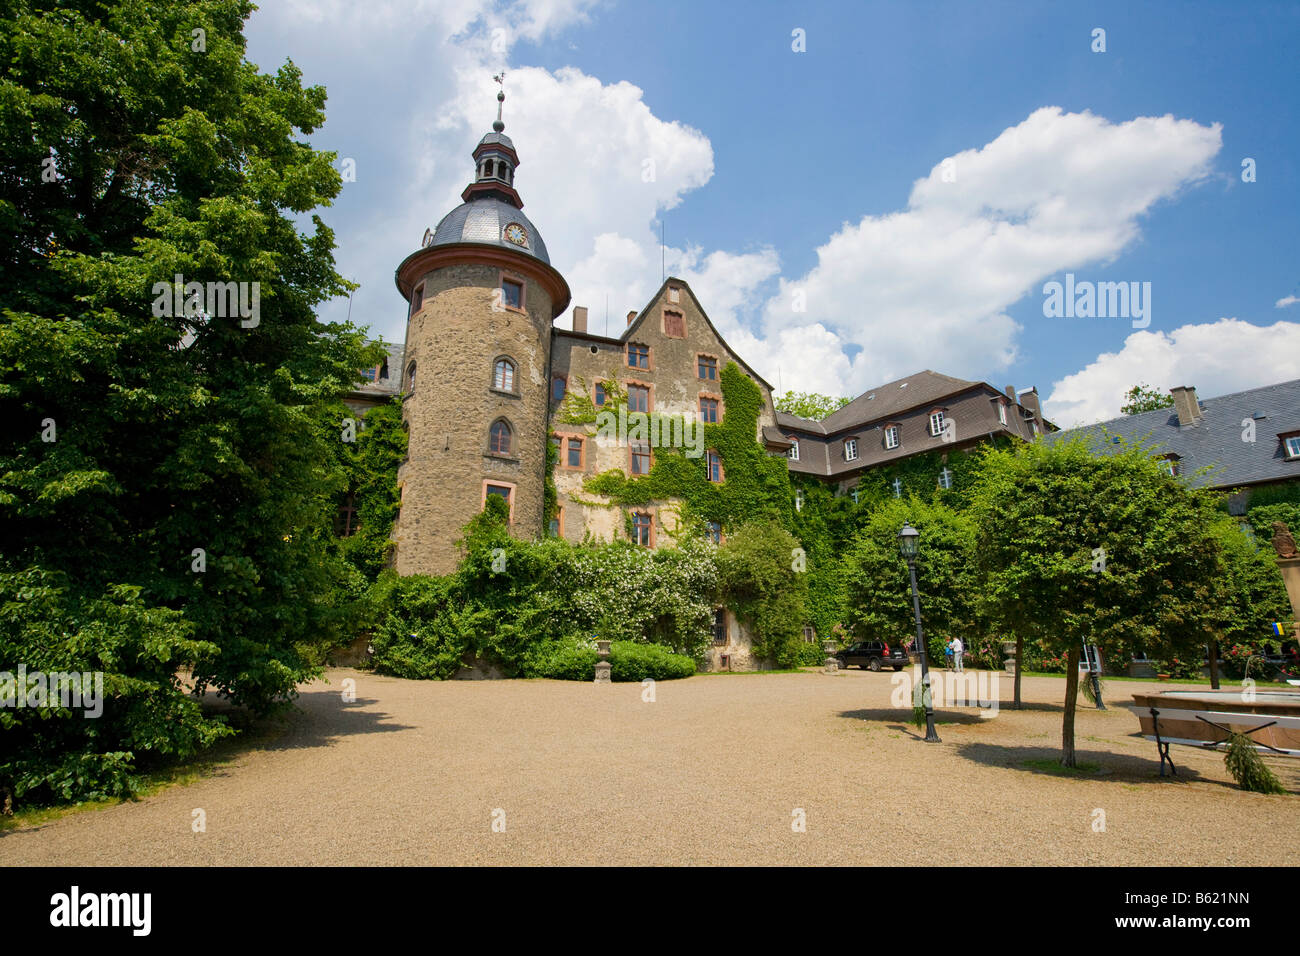 Laubach Castle, residence of the count zu Solms-Laubach, Laubach, Hesse, Germany, Europe Stock Photo